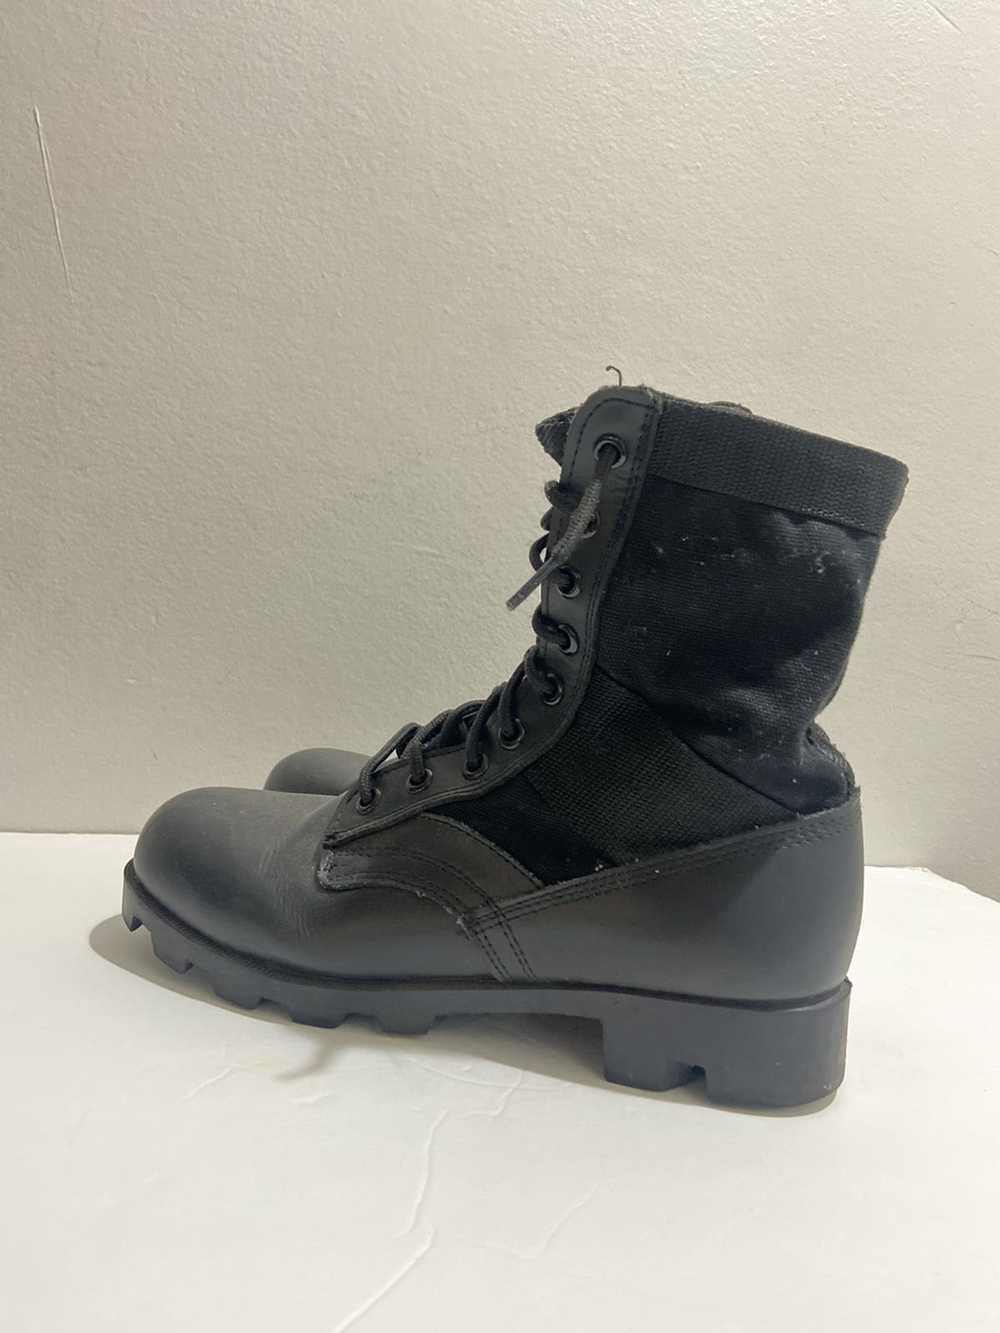 Japanese Brand × Streetwear × Vintage Army boots - image 3